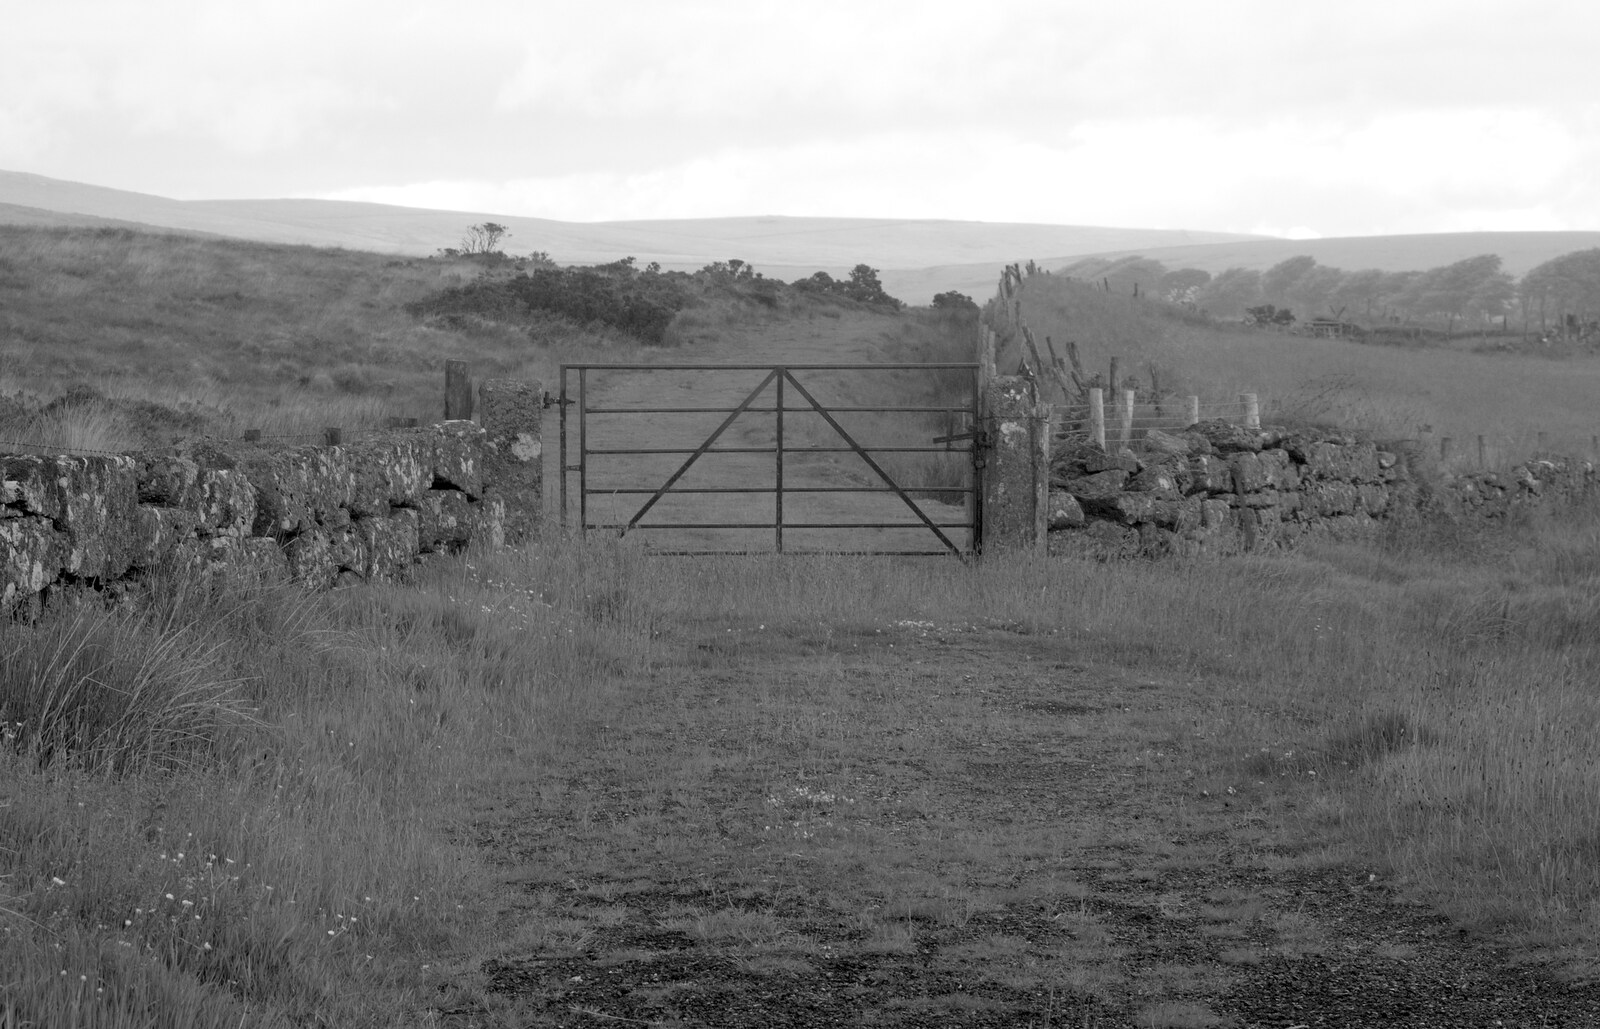 A farm gate on Dartmoor from A Visit to the Aquarium, The Barbican and Dartmoor, Plymouth, Devon - 10th June 2012